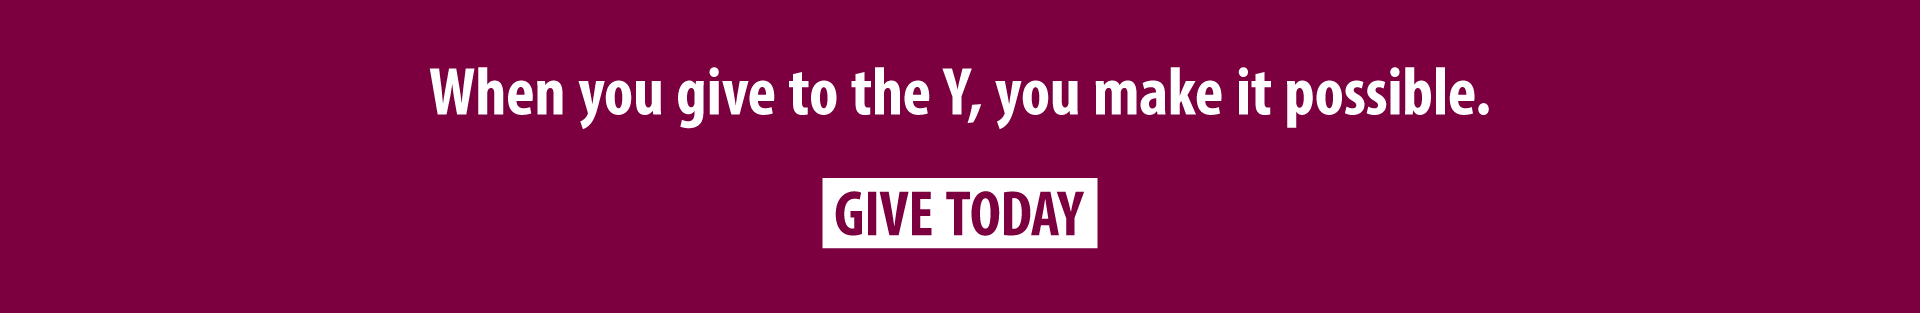 When you give to the Y, you make it possible. Give Today.